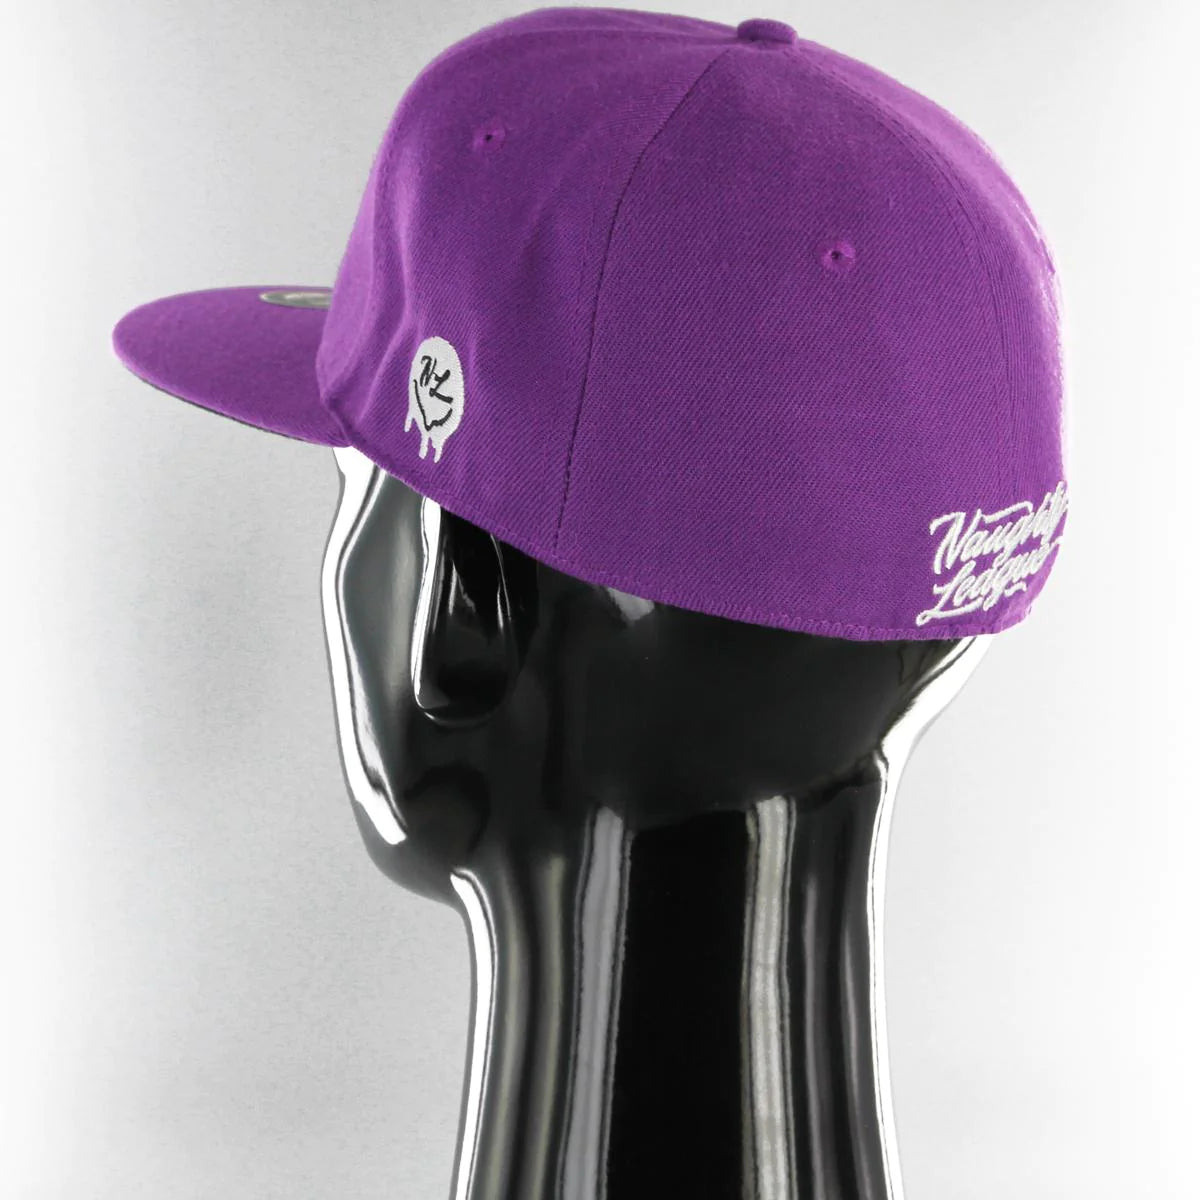 San Jose Stalkers Fitted purple